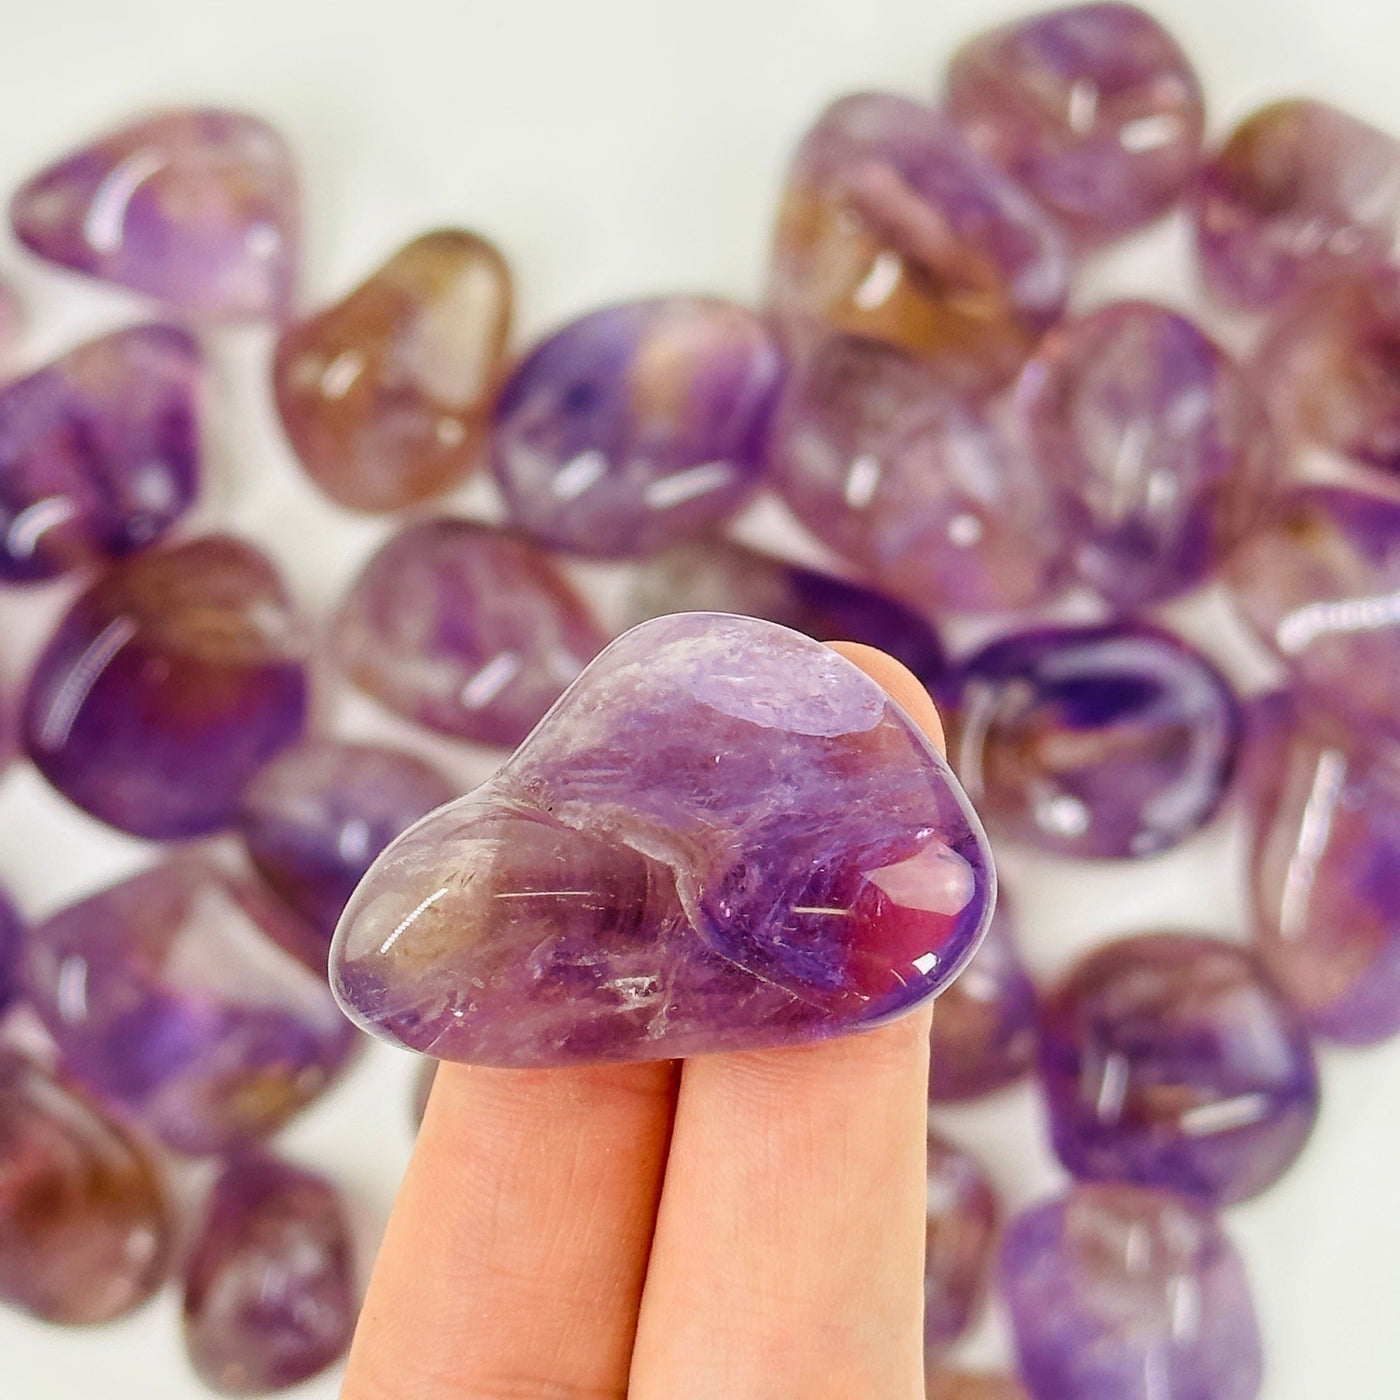 fingers holding up amethyst tumbled stone with others in the background